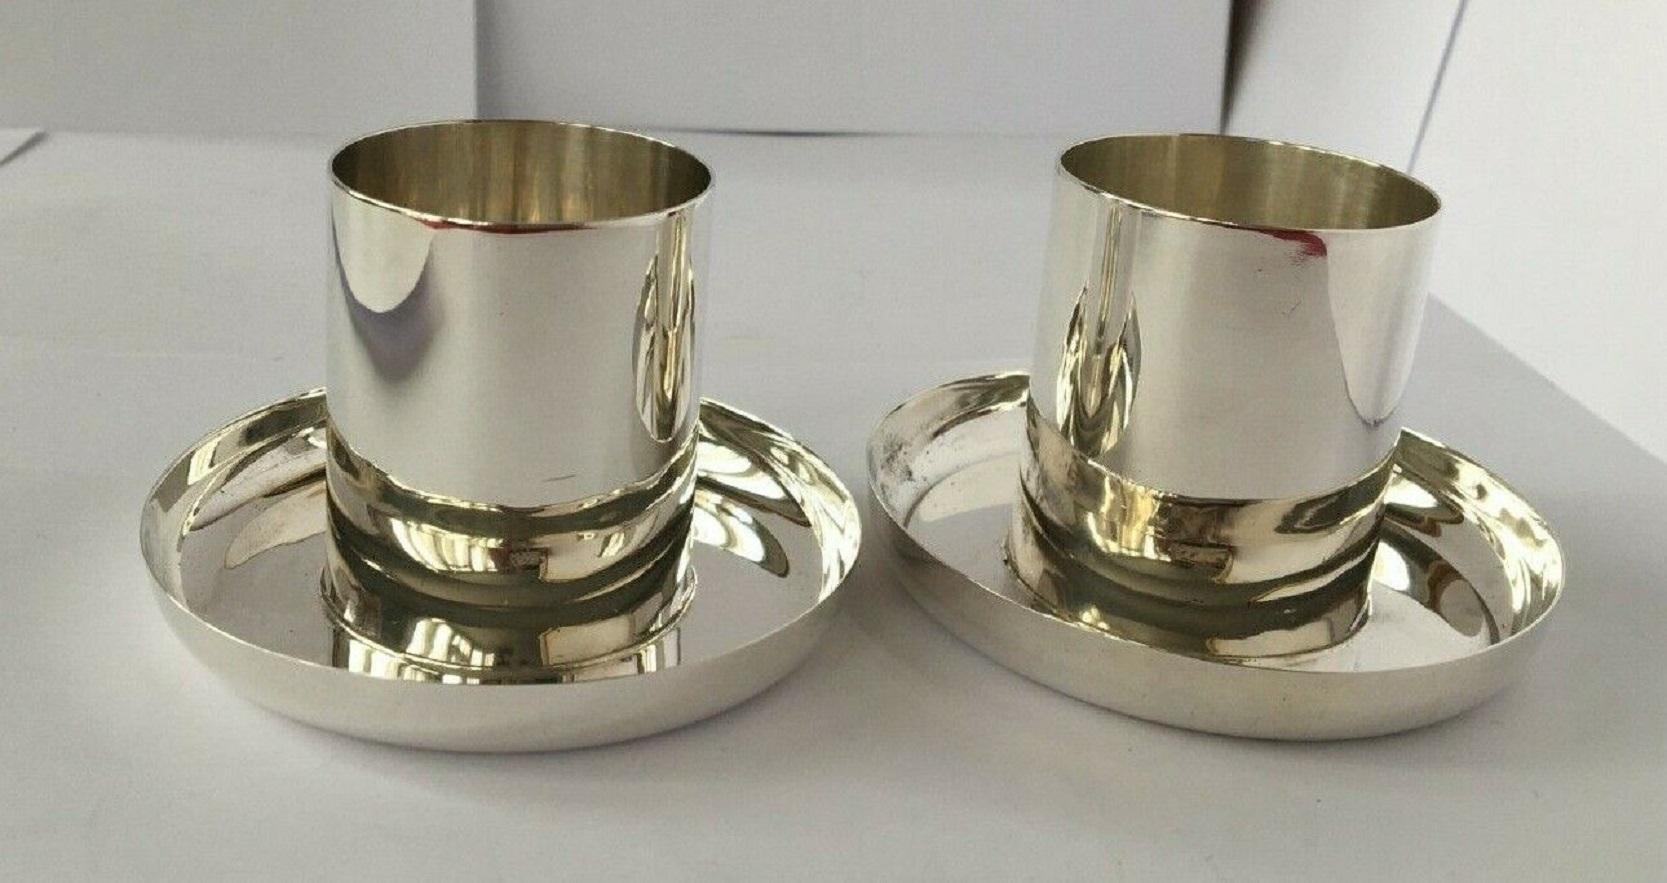 Pair of Art Deco Sterling Silver Candle Holders

In good condition, they are a classic and stylish design. These are solidly constructed, and the large size can easily accommodate candles of various widths. The maker’s name is rubbed off. Made in